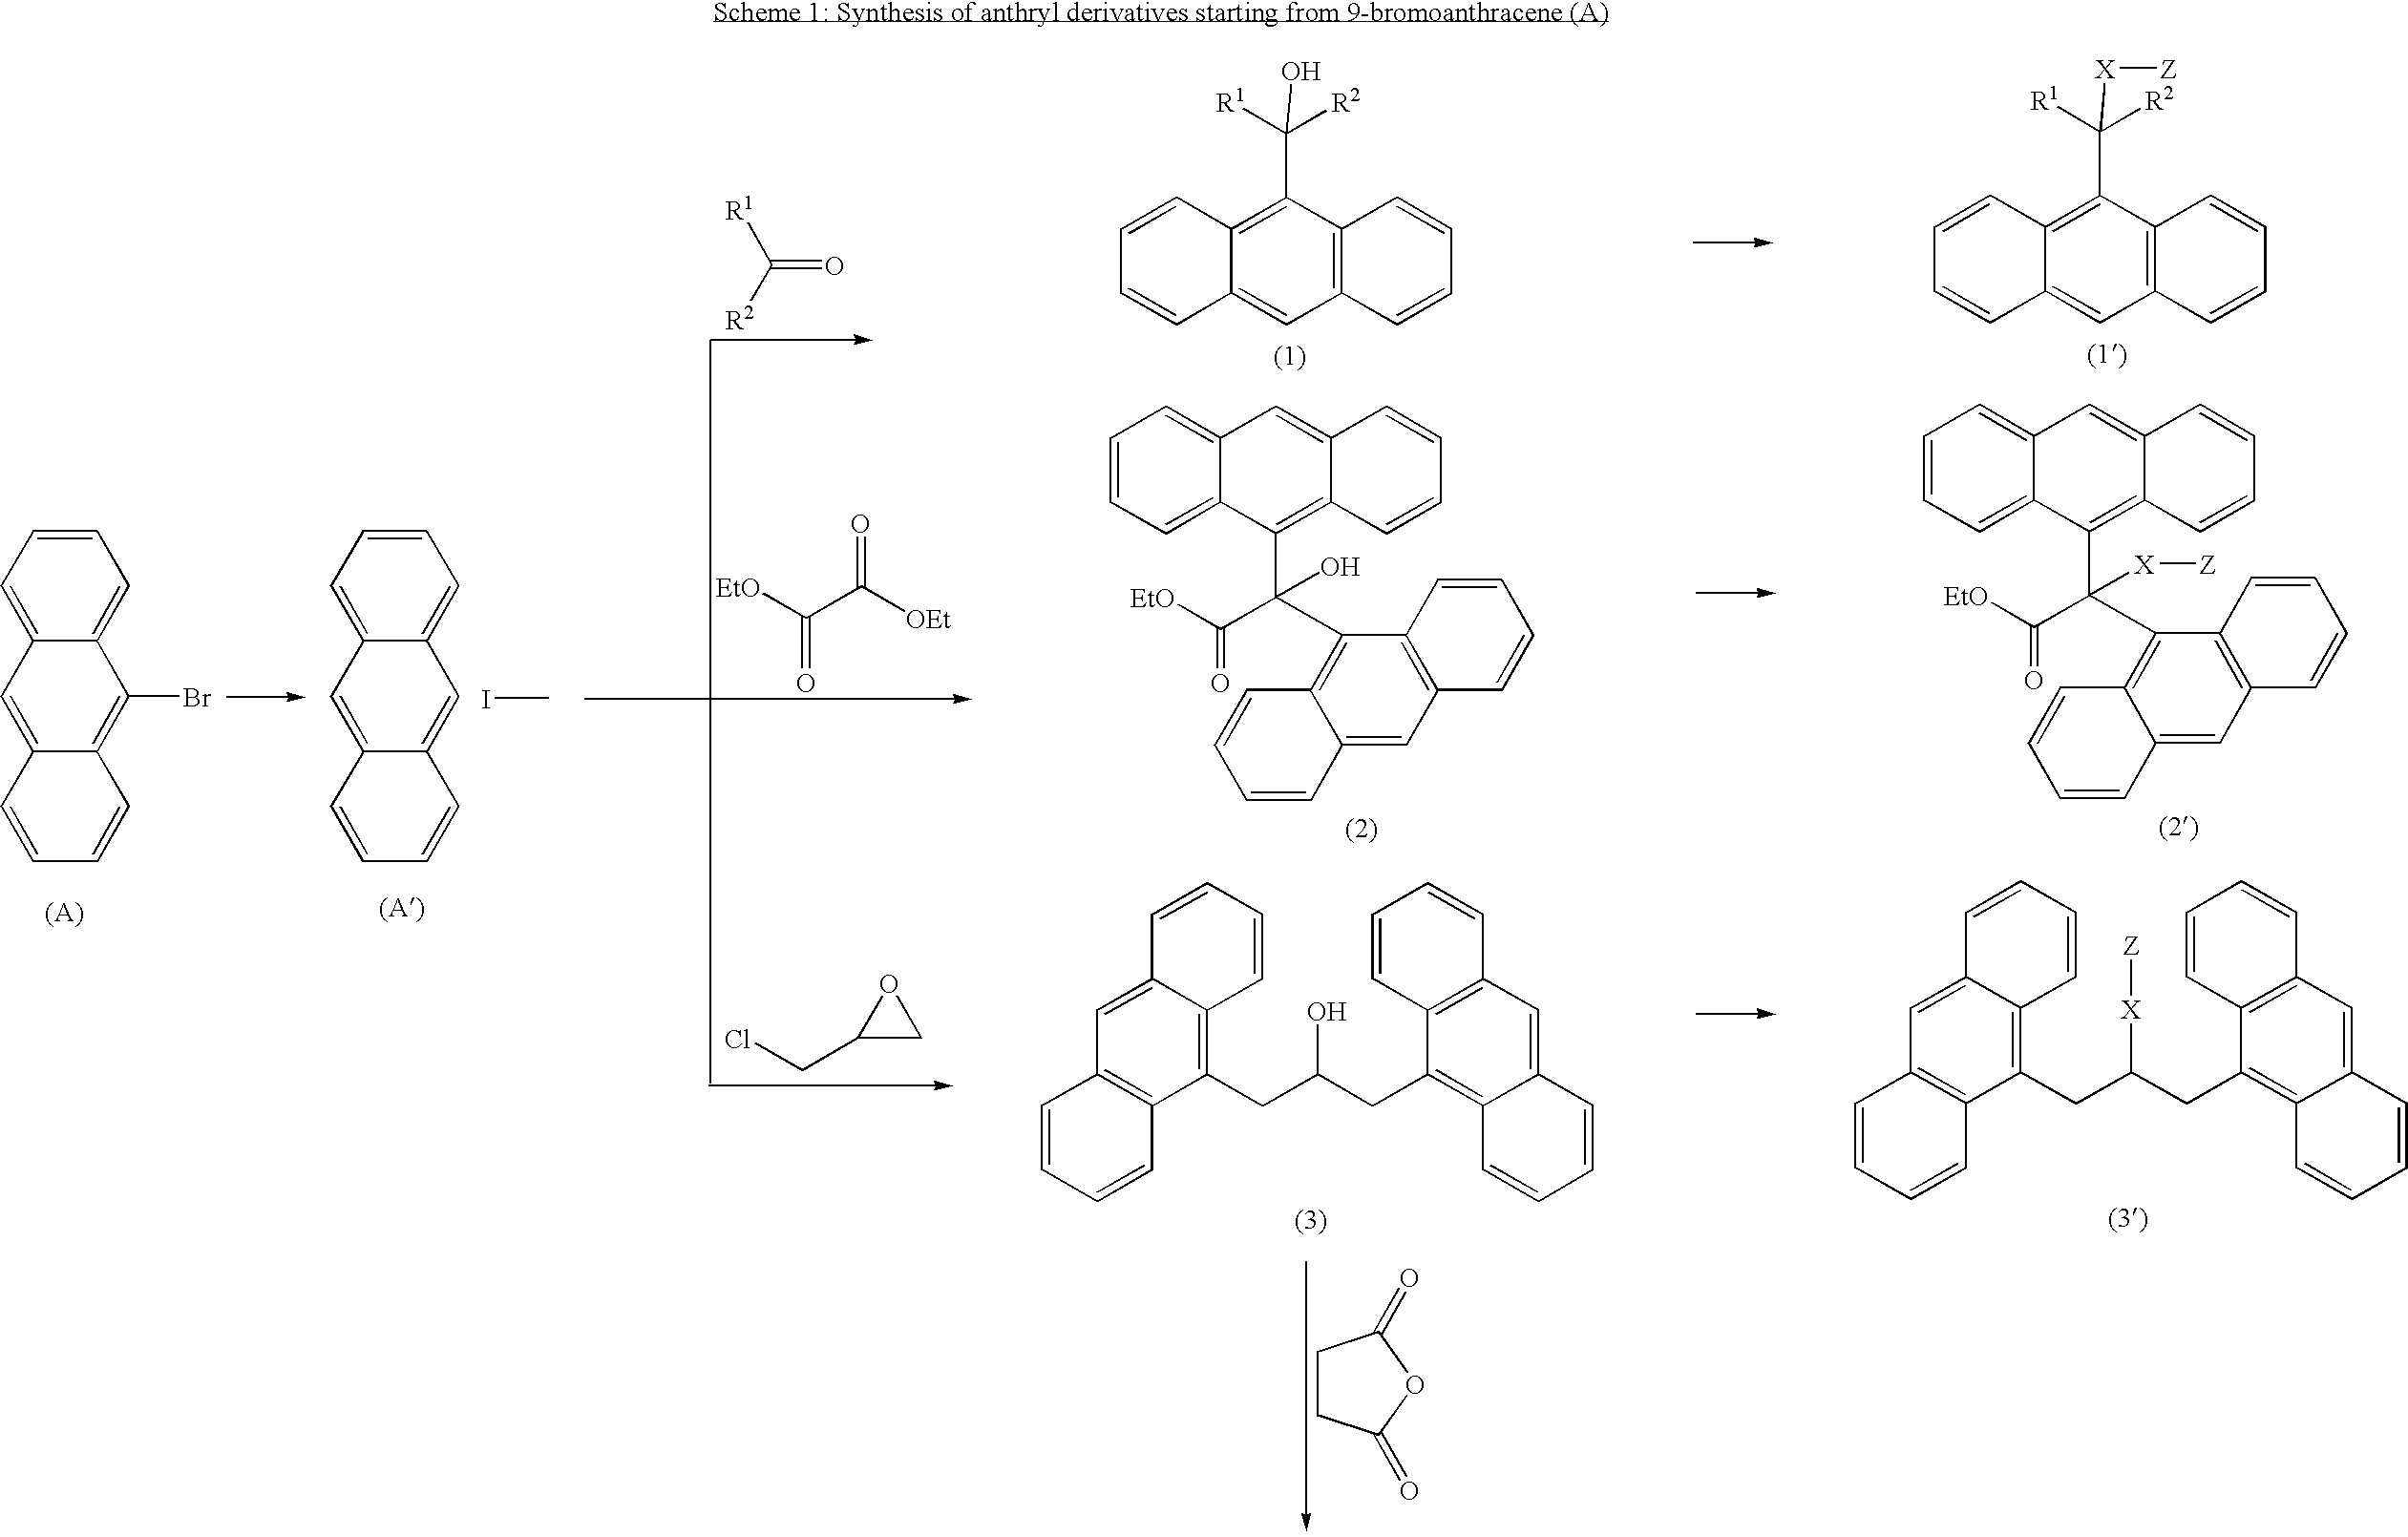 Polycarbocyclic derivatives for modification of resist, optical and etch resistance properties